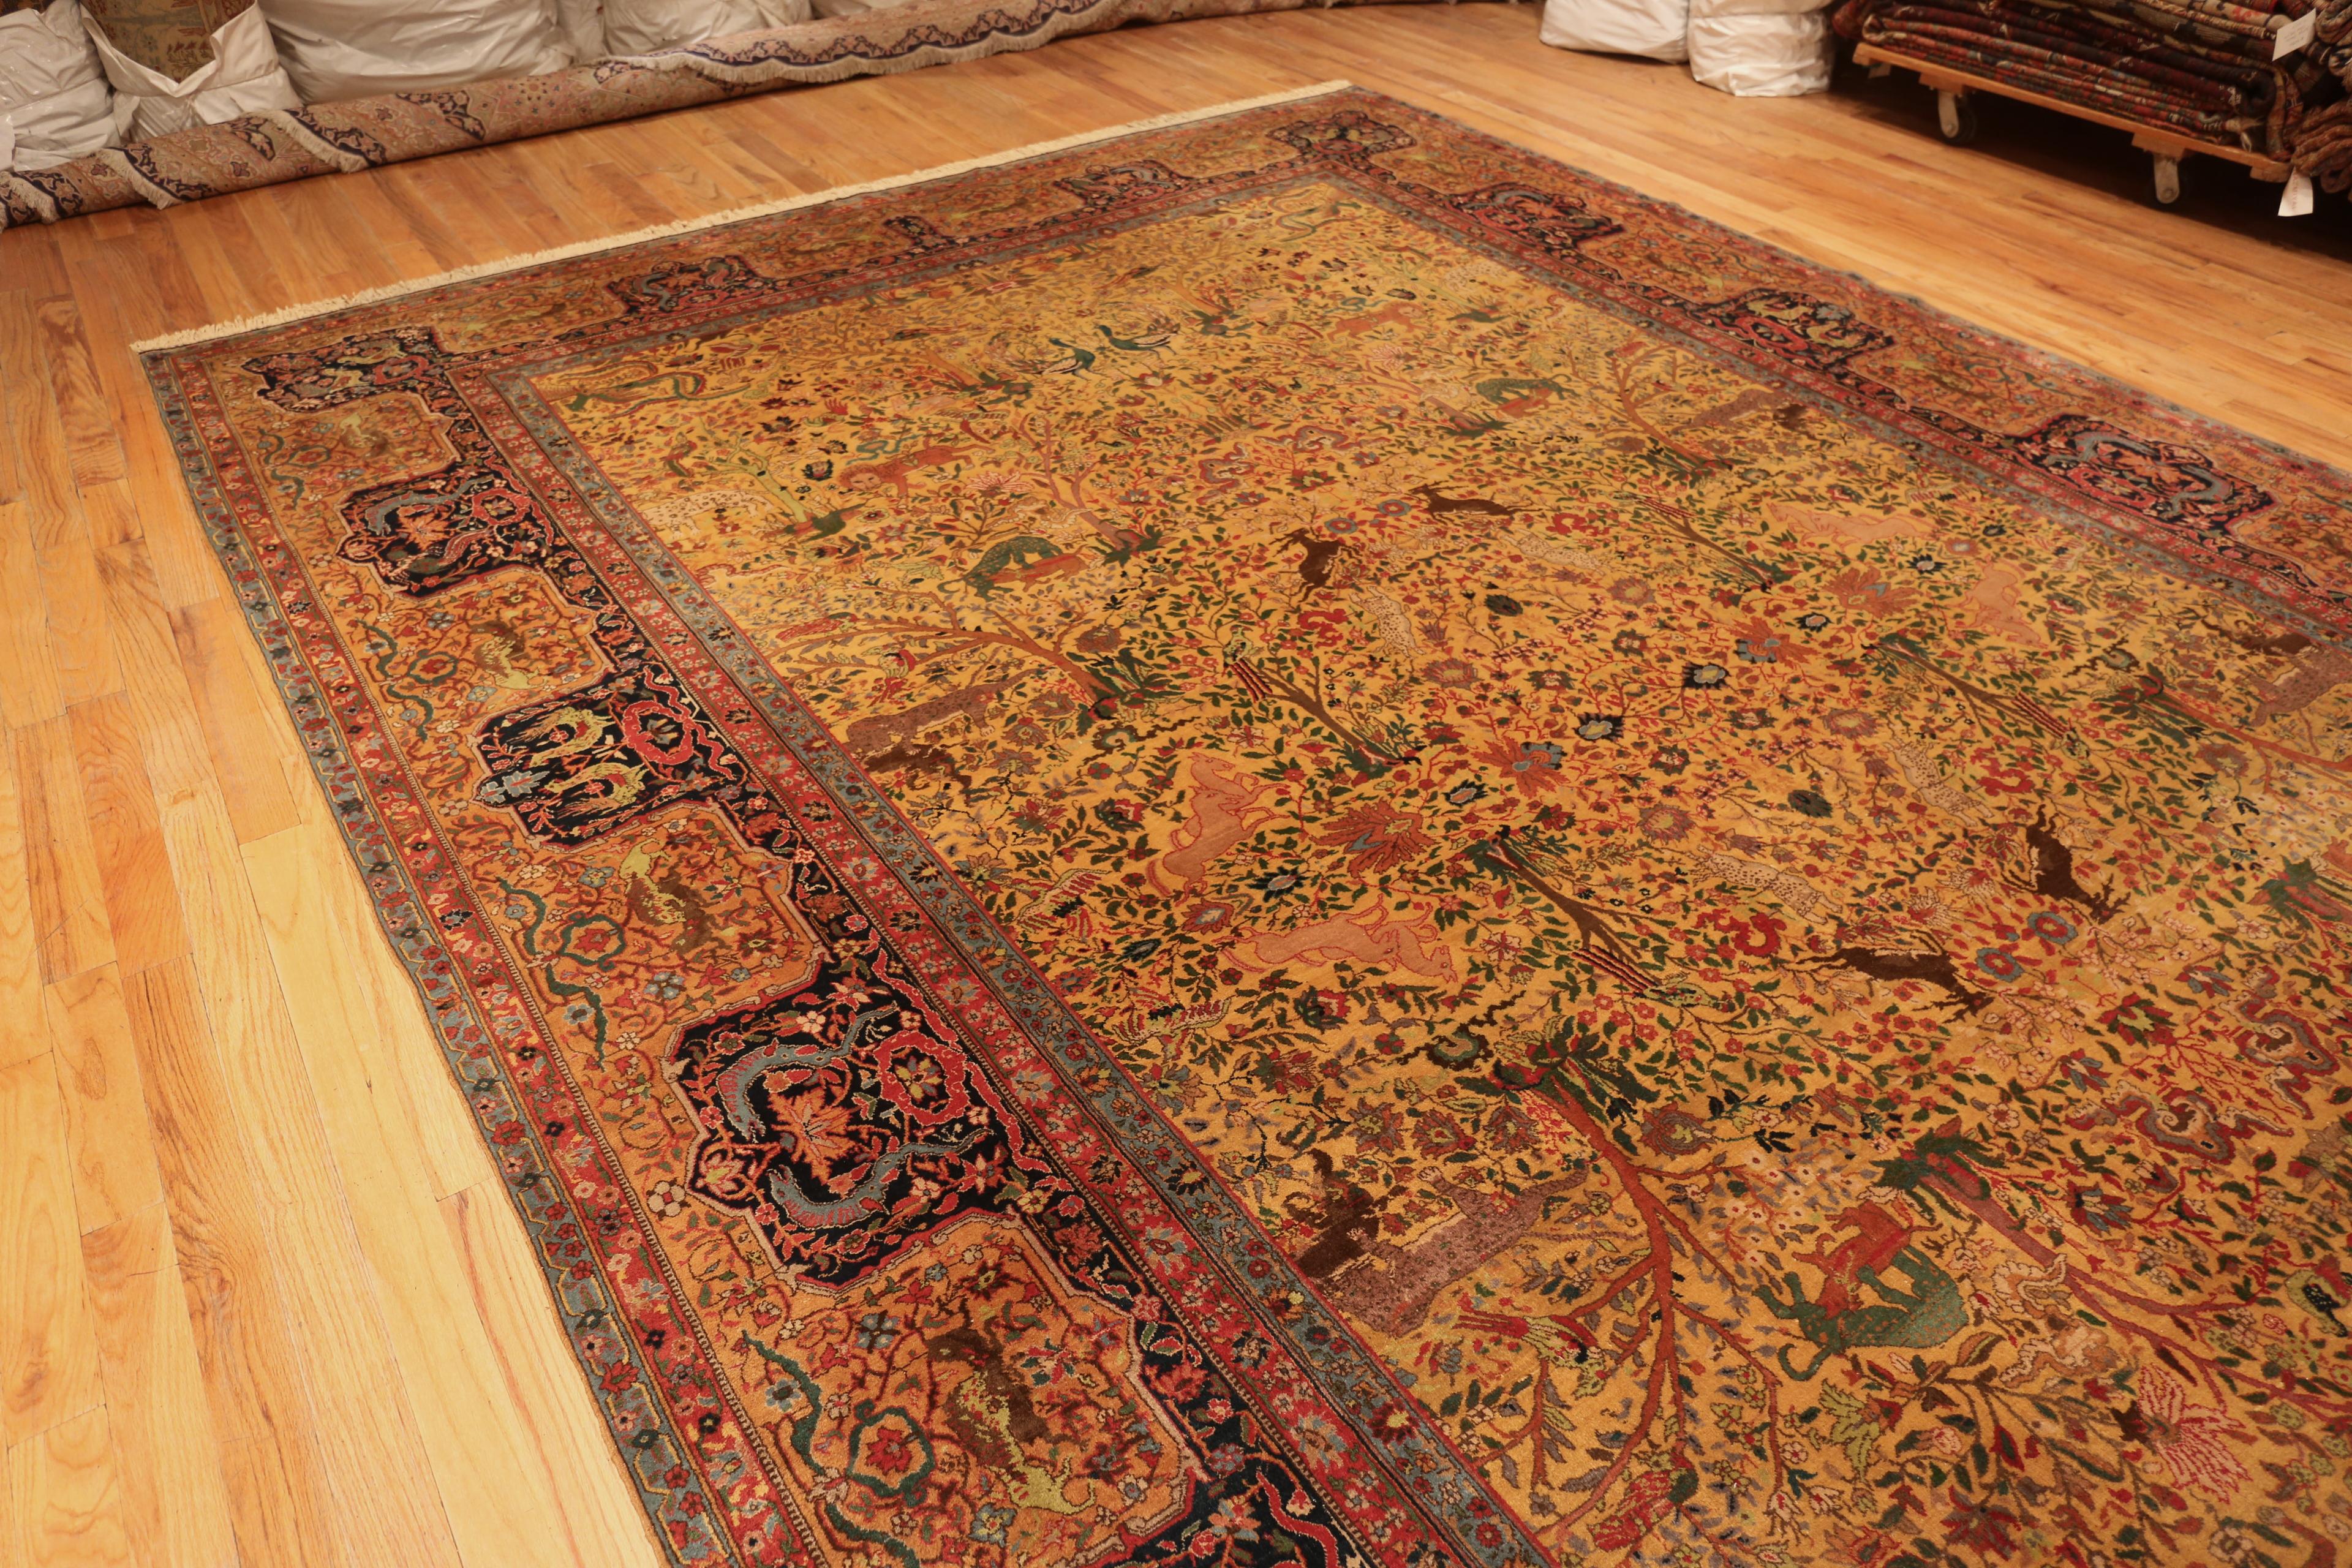 Animal Design Large Antique Indian Agra Rug, Country Of Origin: India, Circa date: 1900. Size: 11 ft x 17 ft 8 in (3.35 m x 5.38 m)

